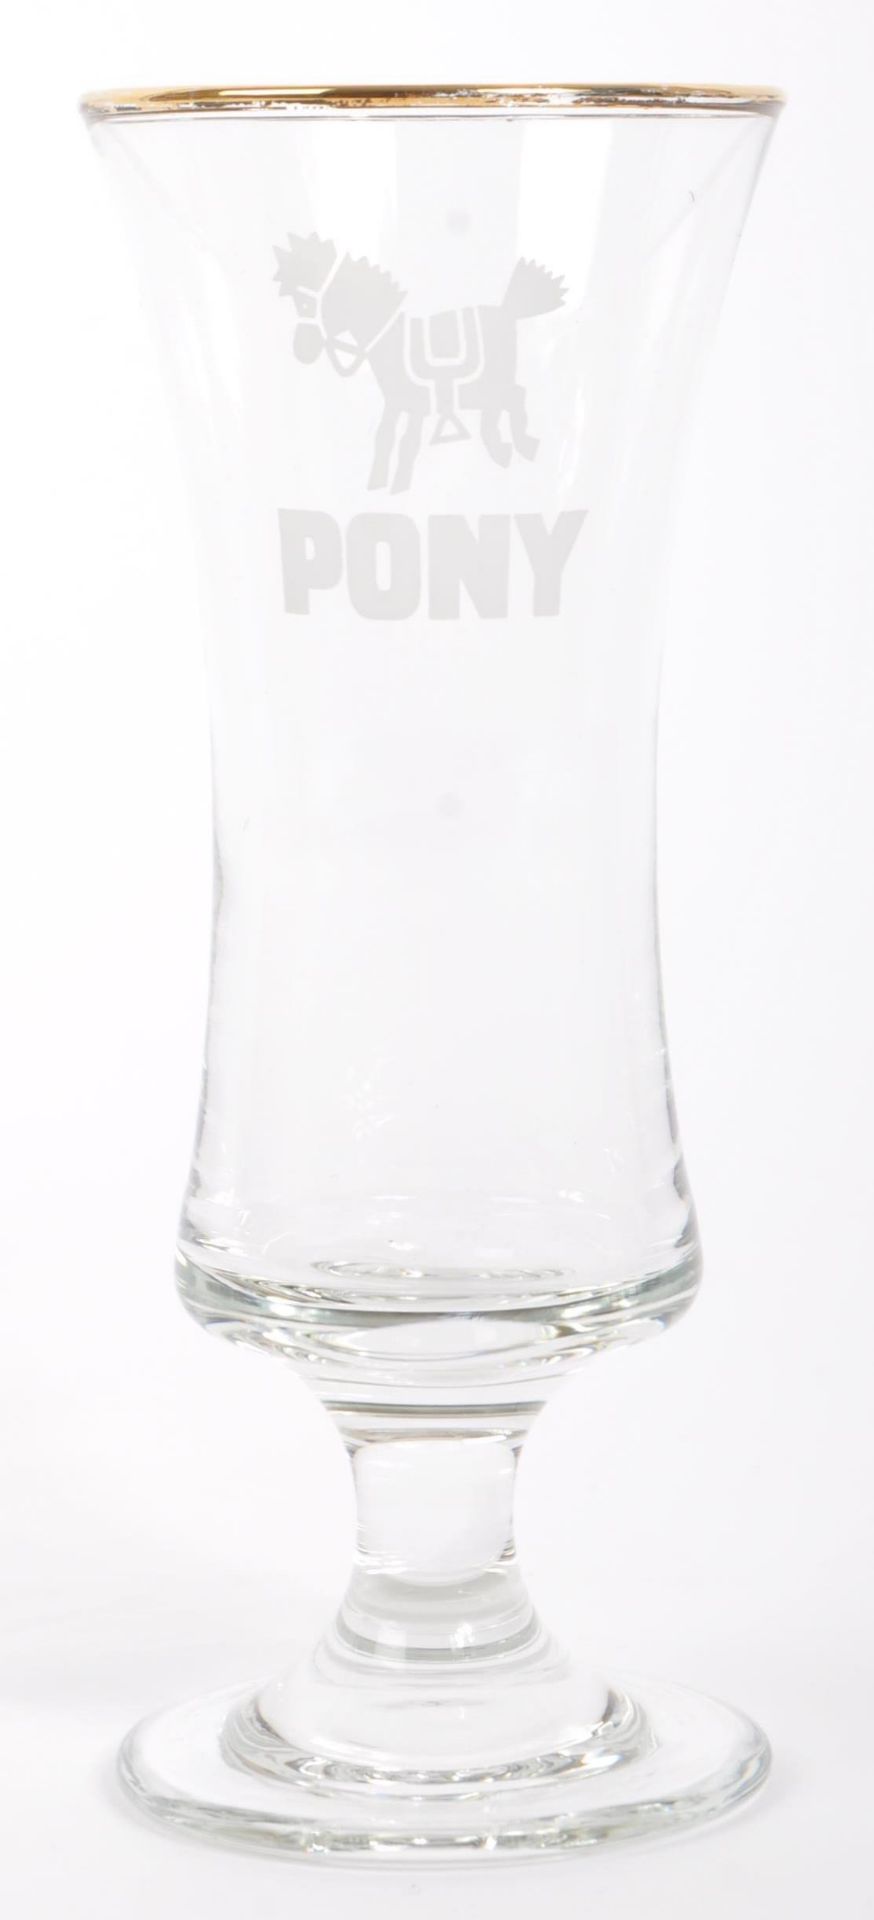 COLLECTION OF VINTAGE 20TH CENTURY PONY DRINKING GLASSES - Image 2 of 4